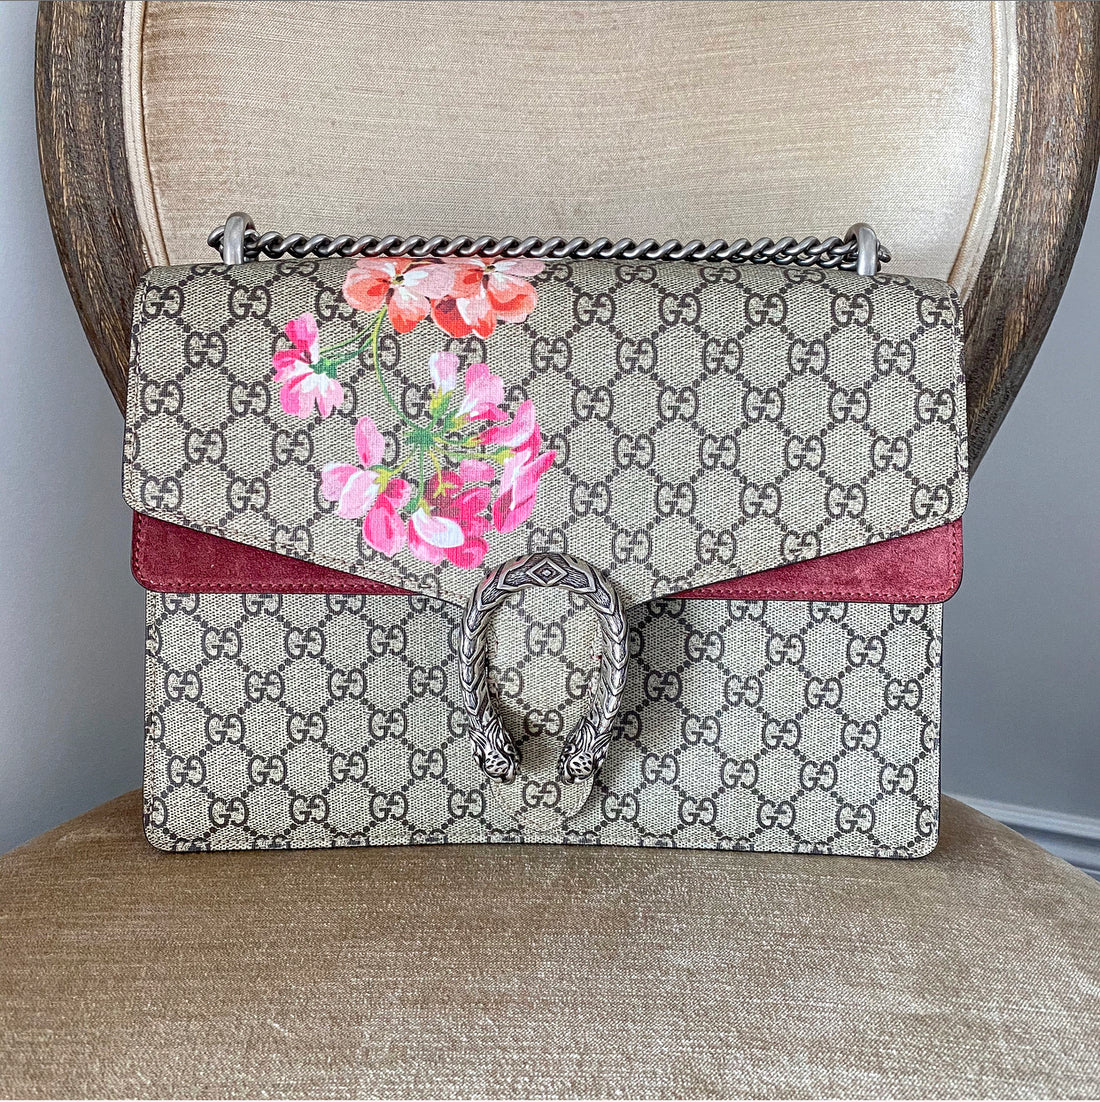 Gucci GG Supreme blooms pouch in pink. In excellent